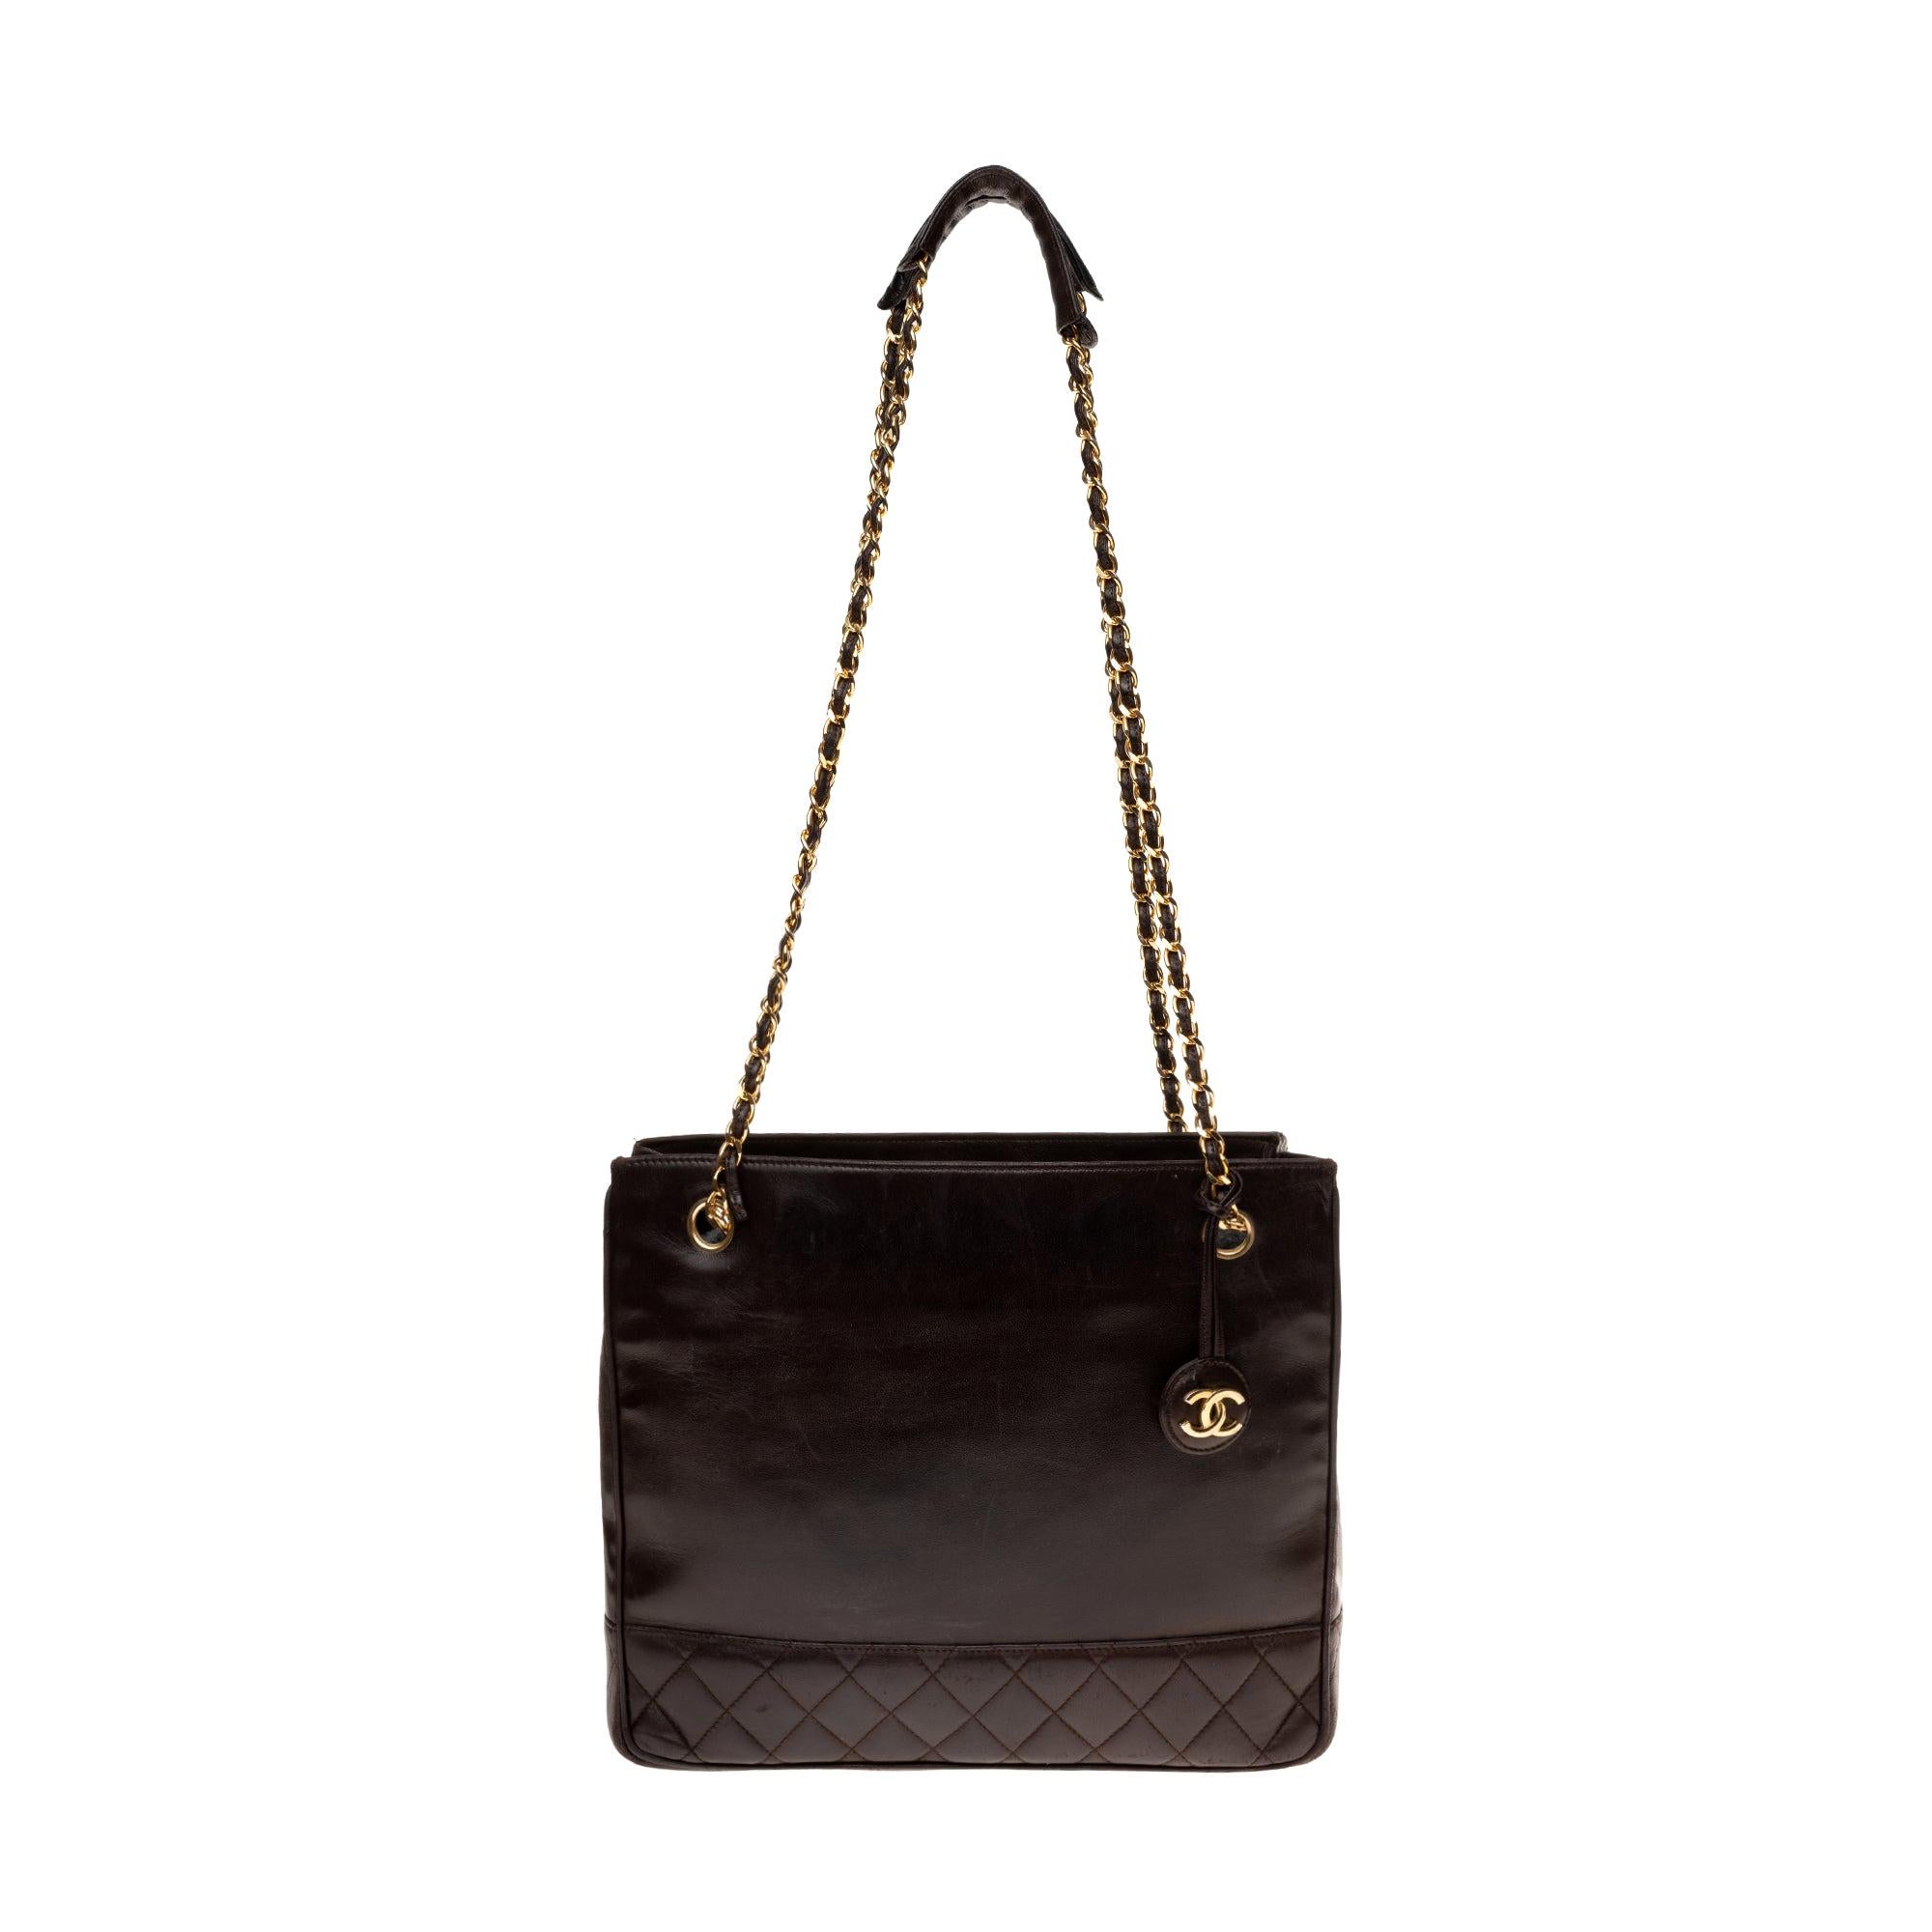 Chanel Tote bag in brown lambskin, gold hardware !